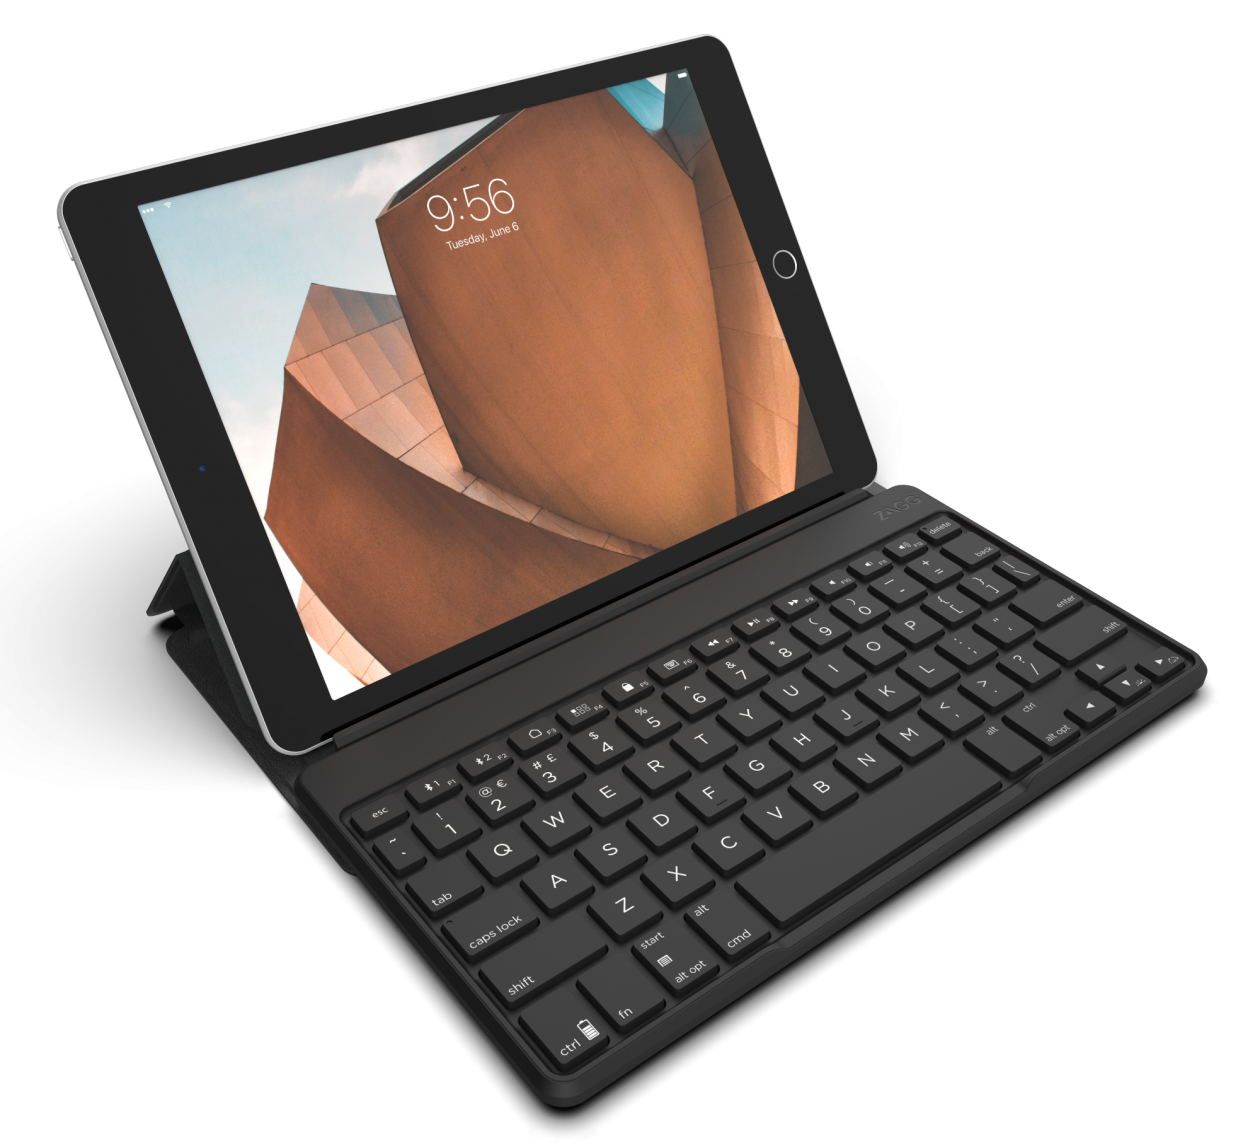 ZAGG launches wireless keyboard that you can use with any device